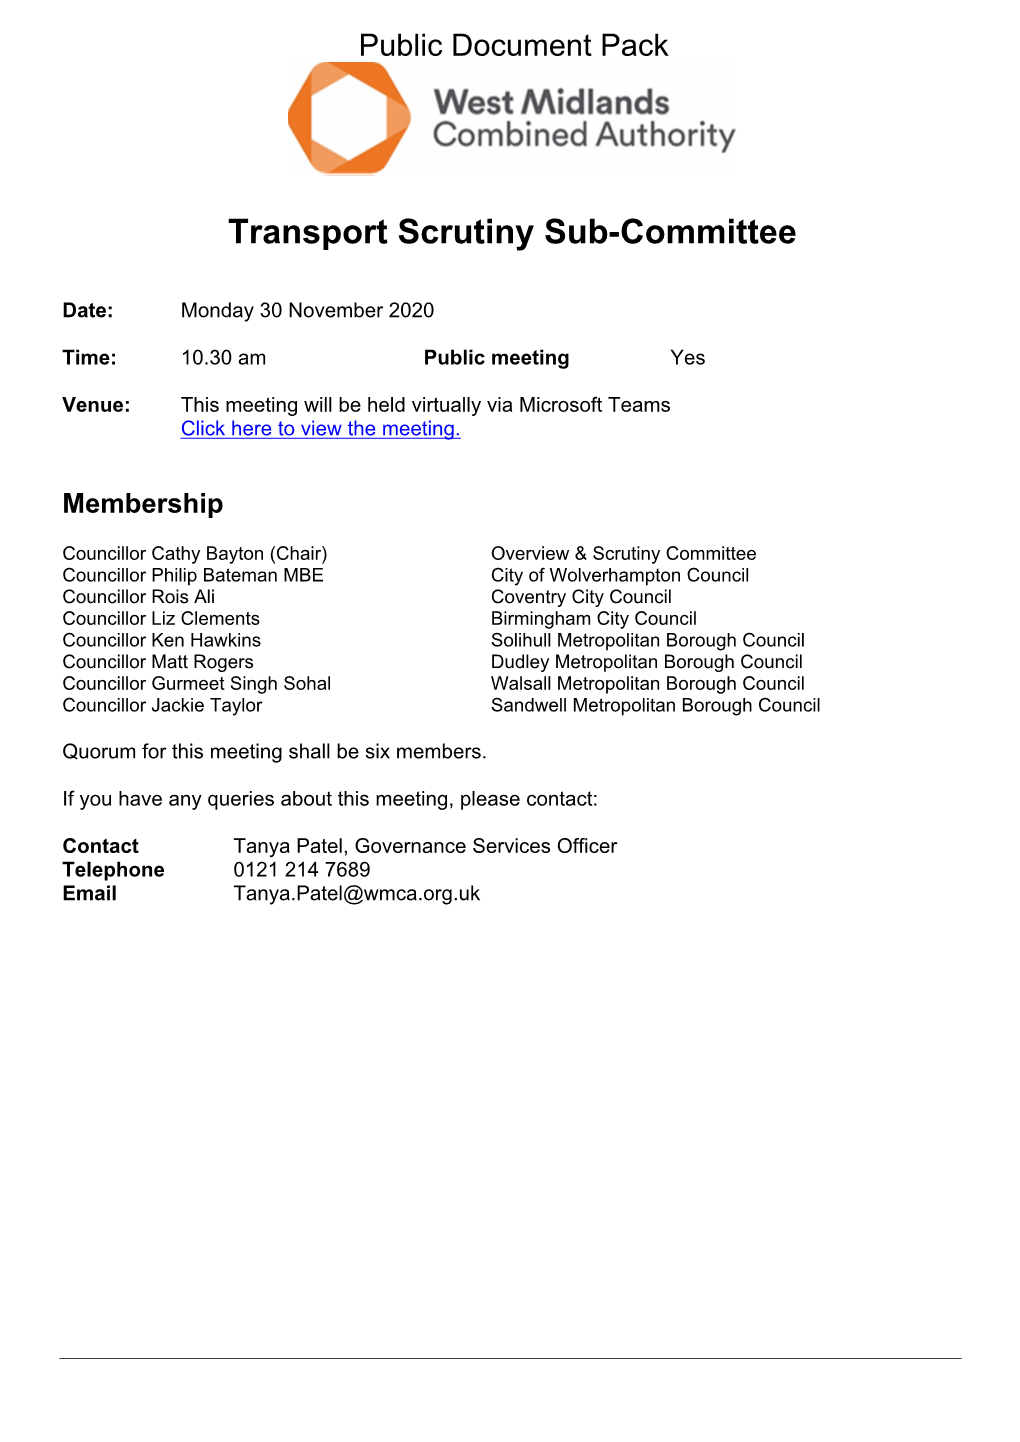 (Public Pack)Agenda Document for Transport Scrutiny Sub-Committee